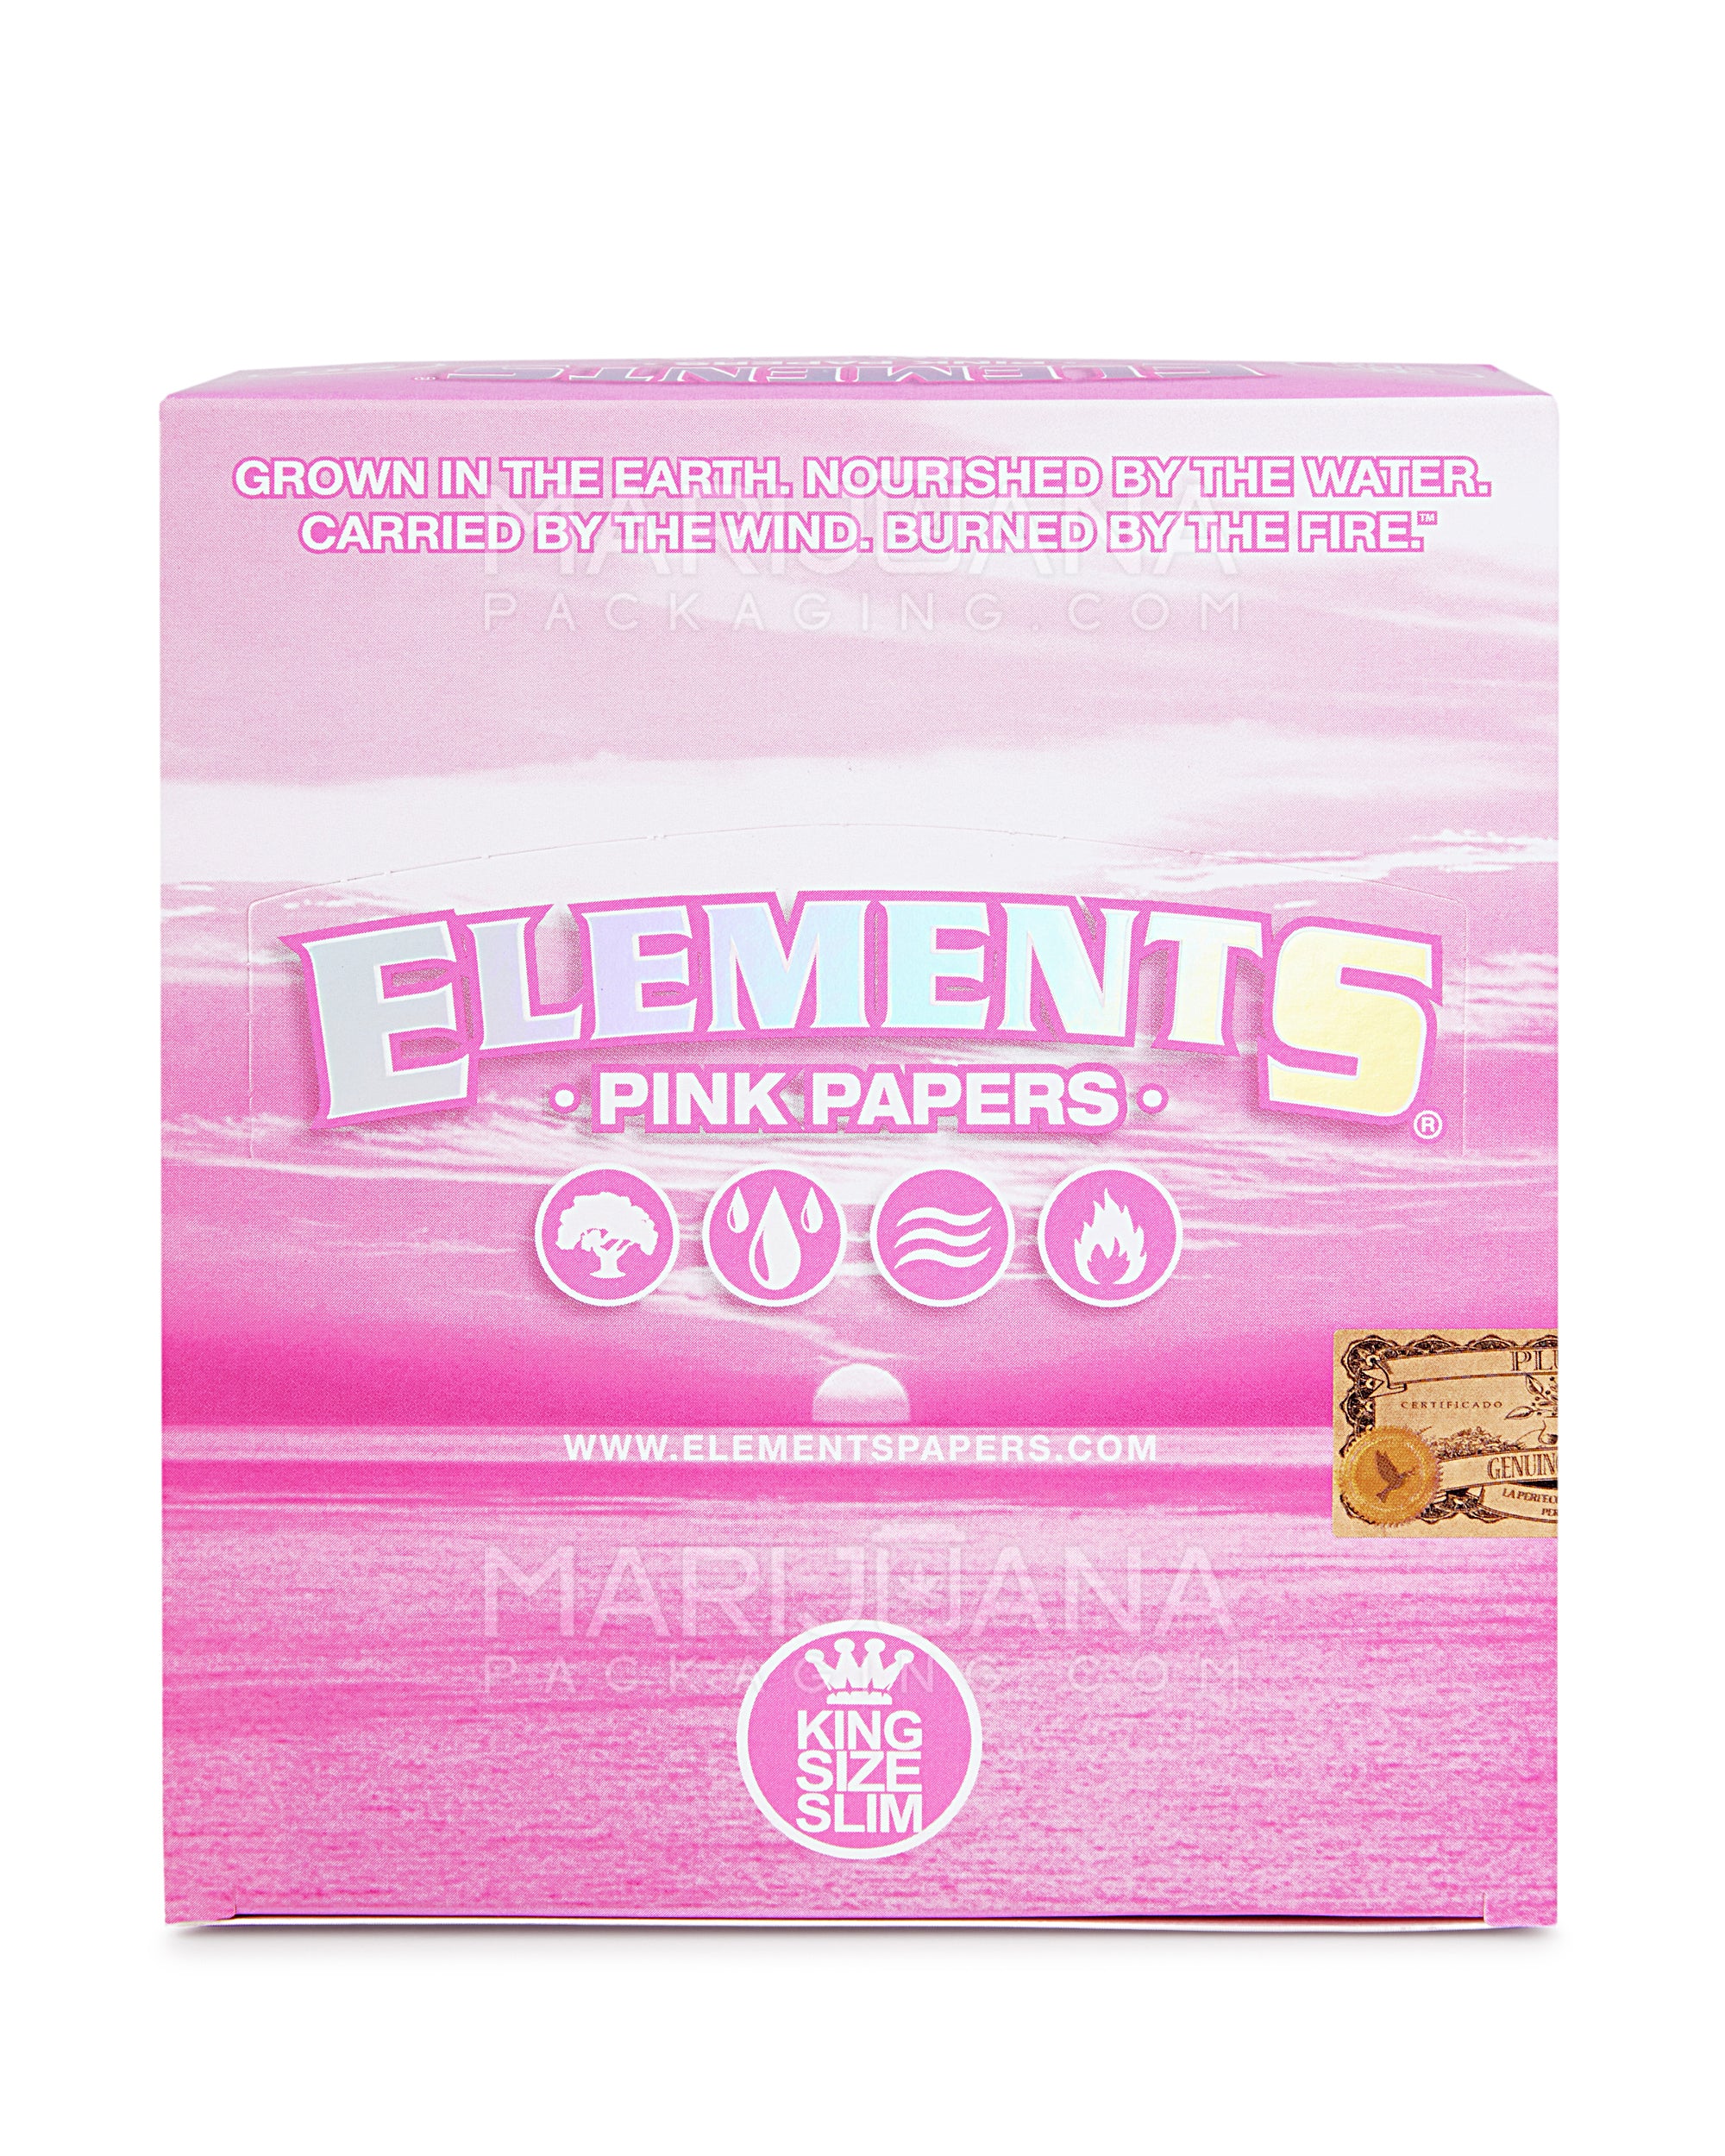 ELEMENTS | 'Retail Display' King Size Slim Ultra Thin Rolling Papers | 116mm - Pink Rice Paper - 50 Count - 4